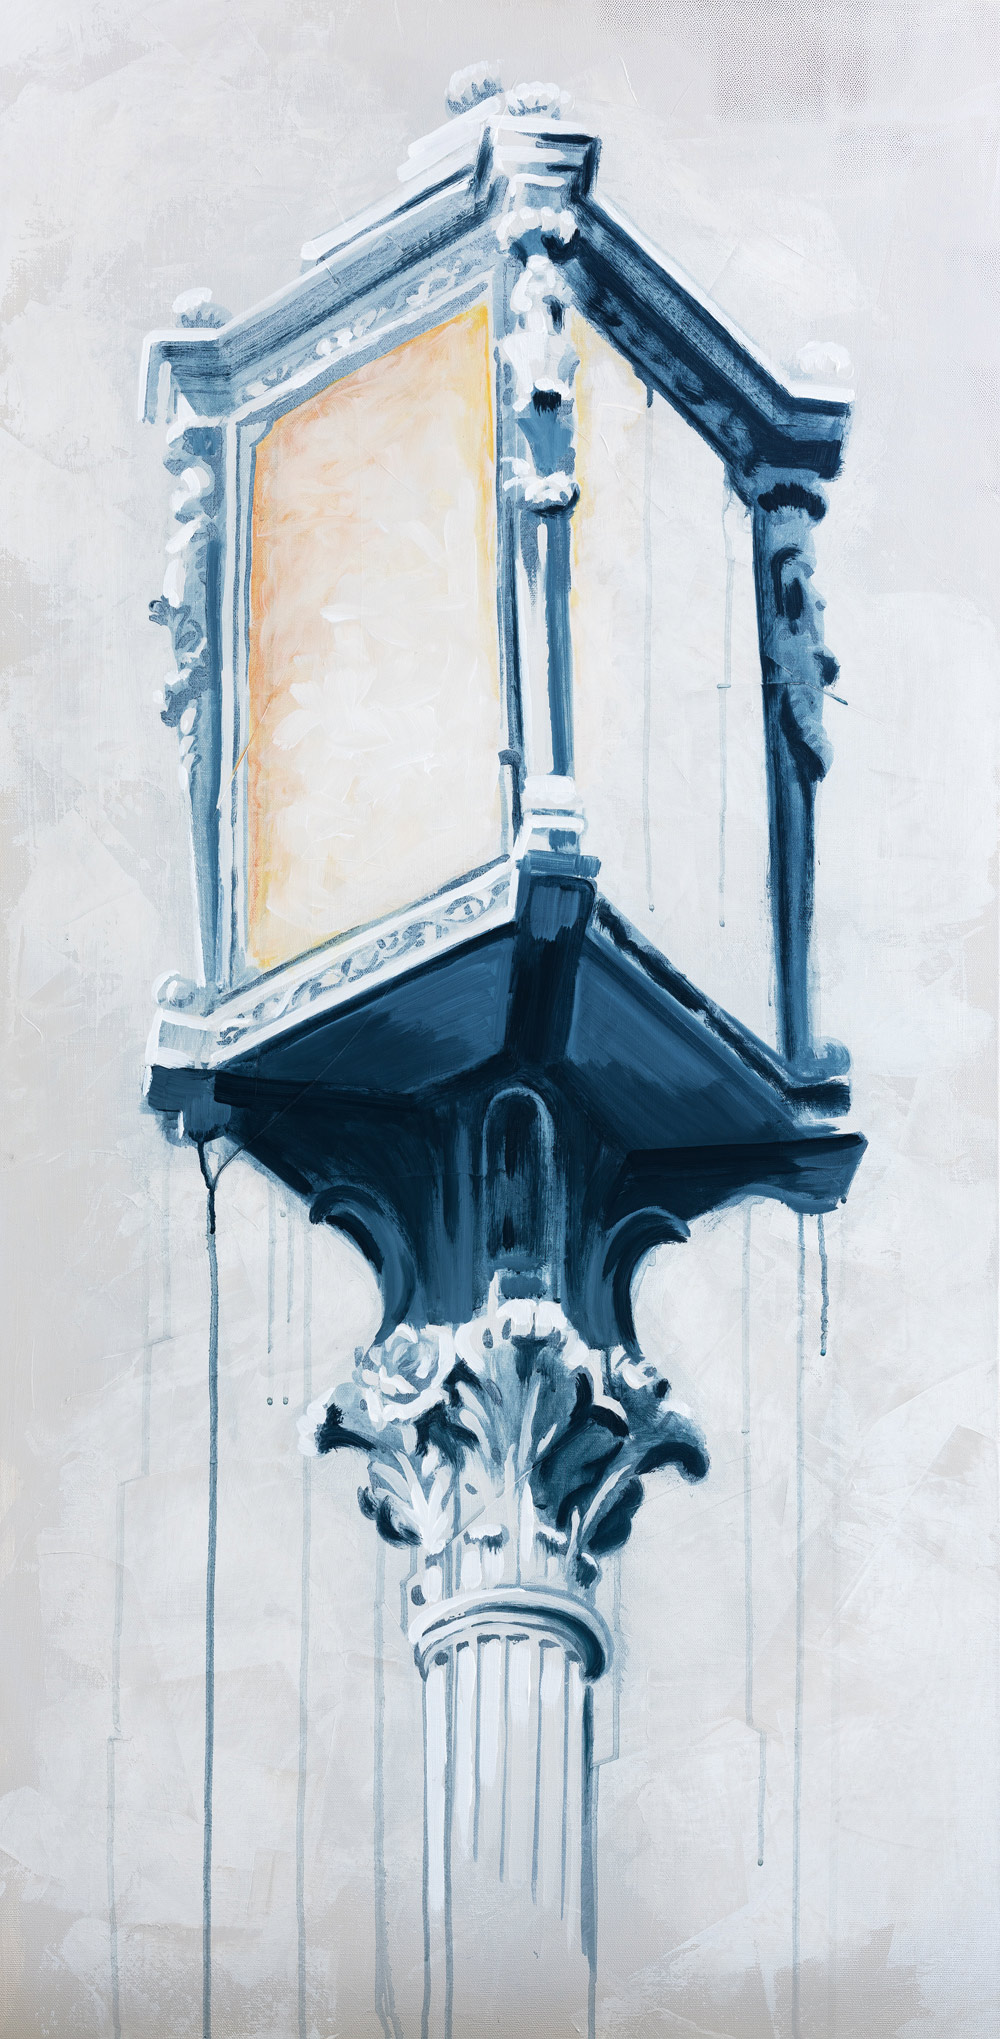 Through-Town-and-Right_Architectural-Painting-by-Teale-Hatheway_1000px